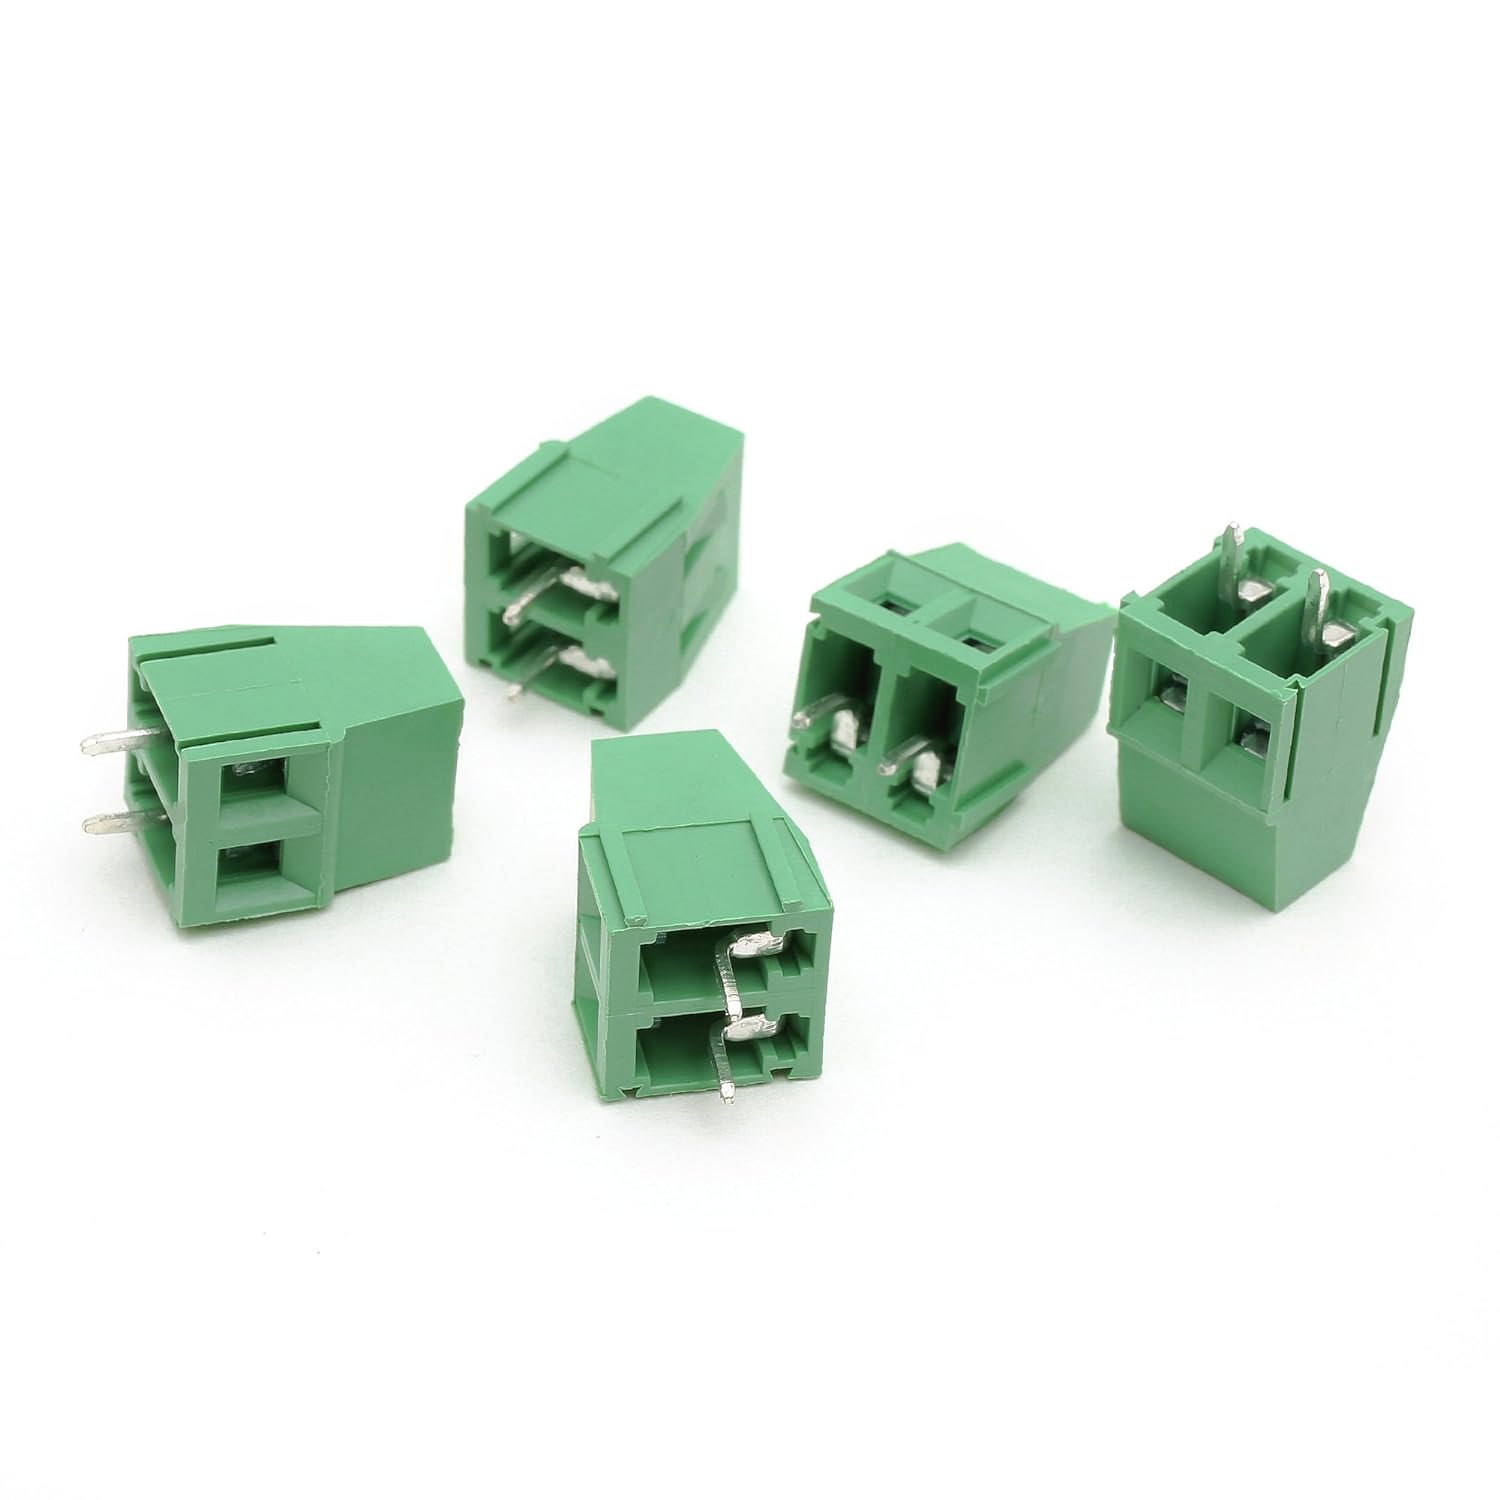 Kf 128 2p 5mm Pitch 2 Pin Pcb Screw Terminal Block Connector